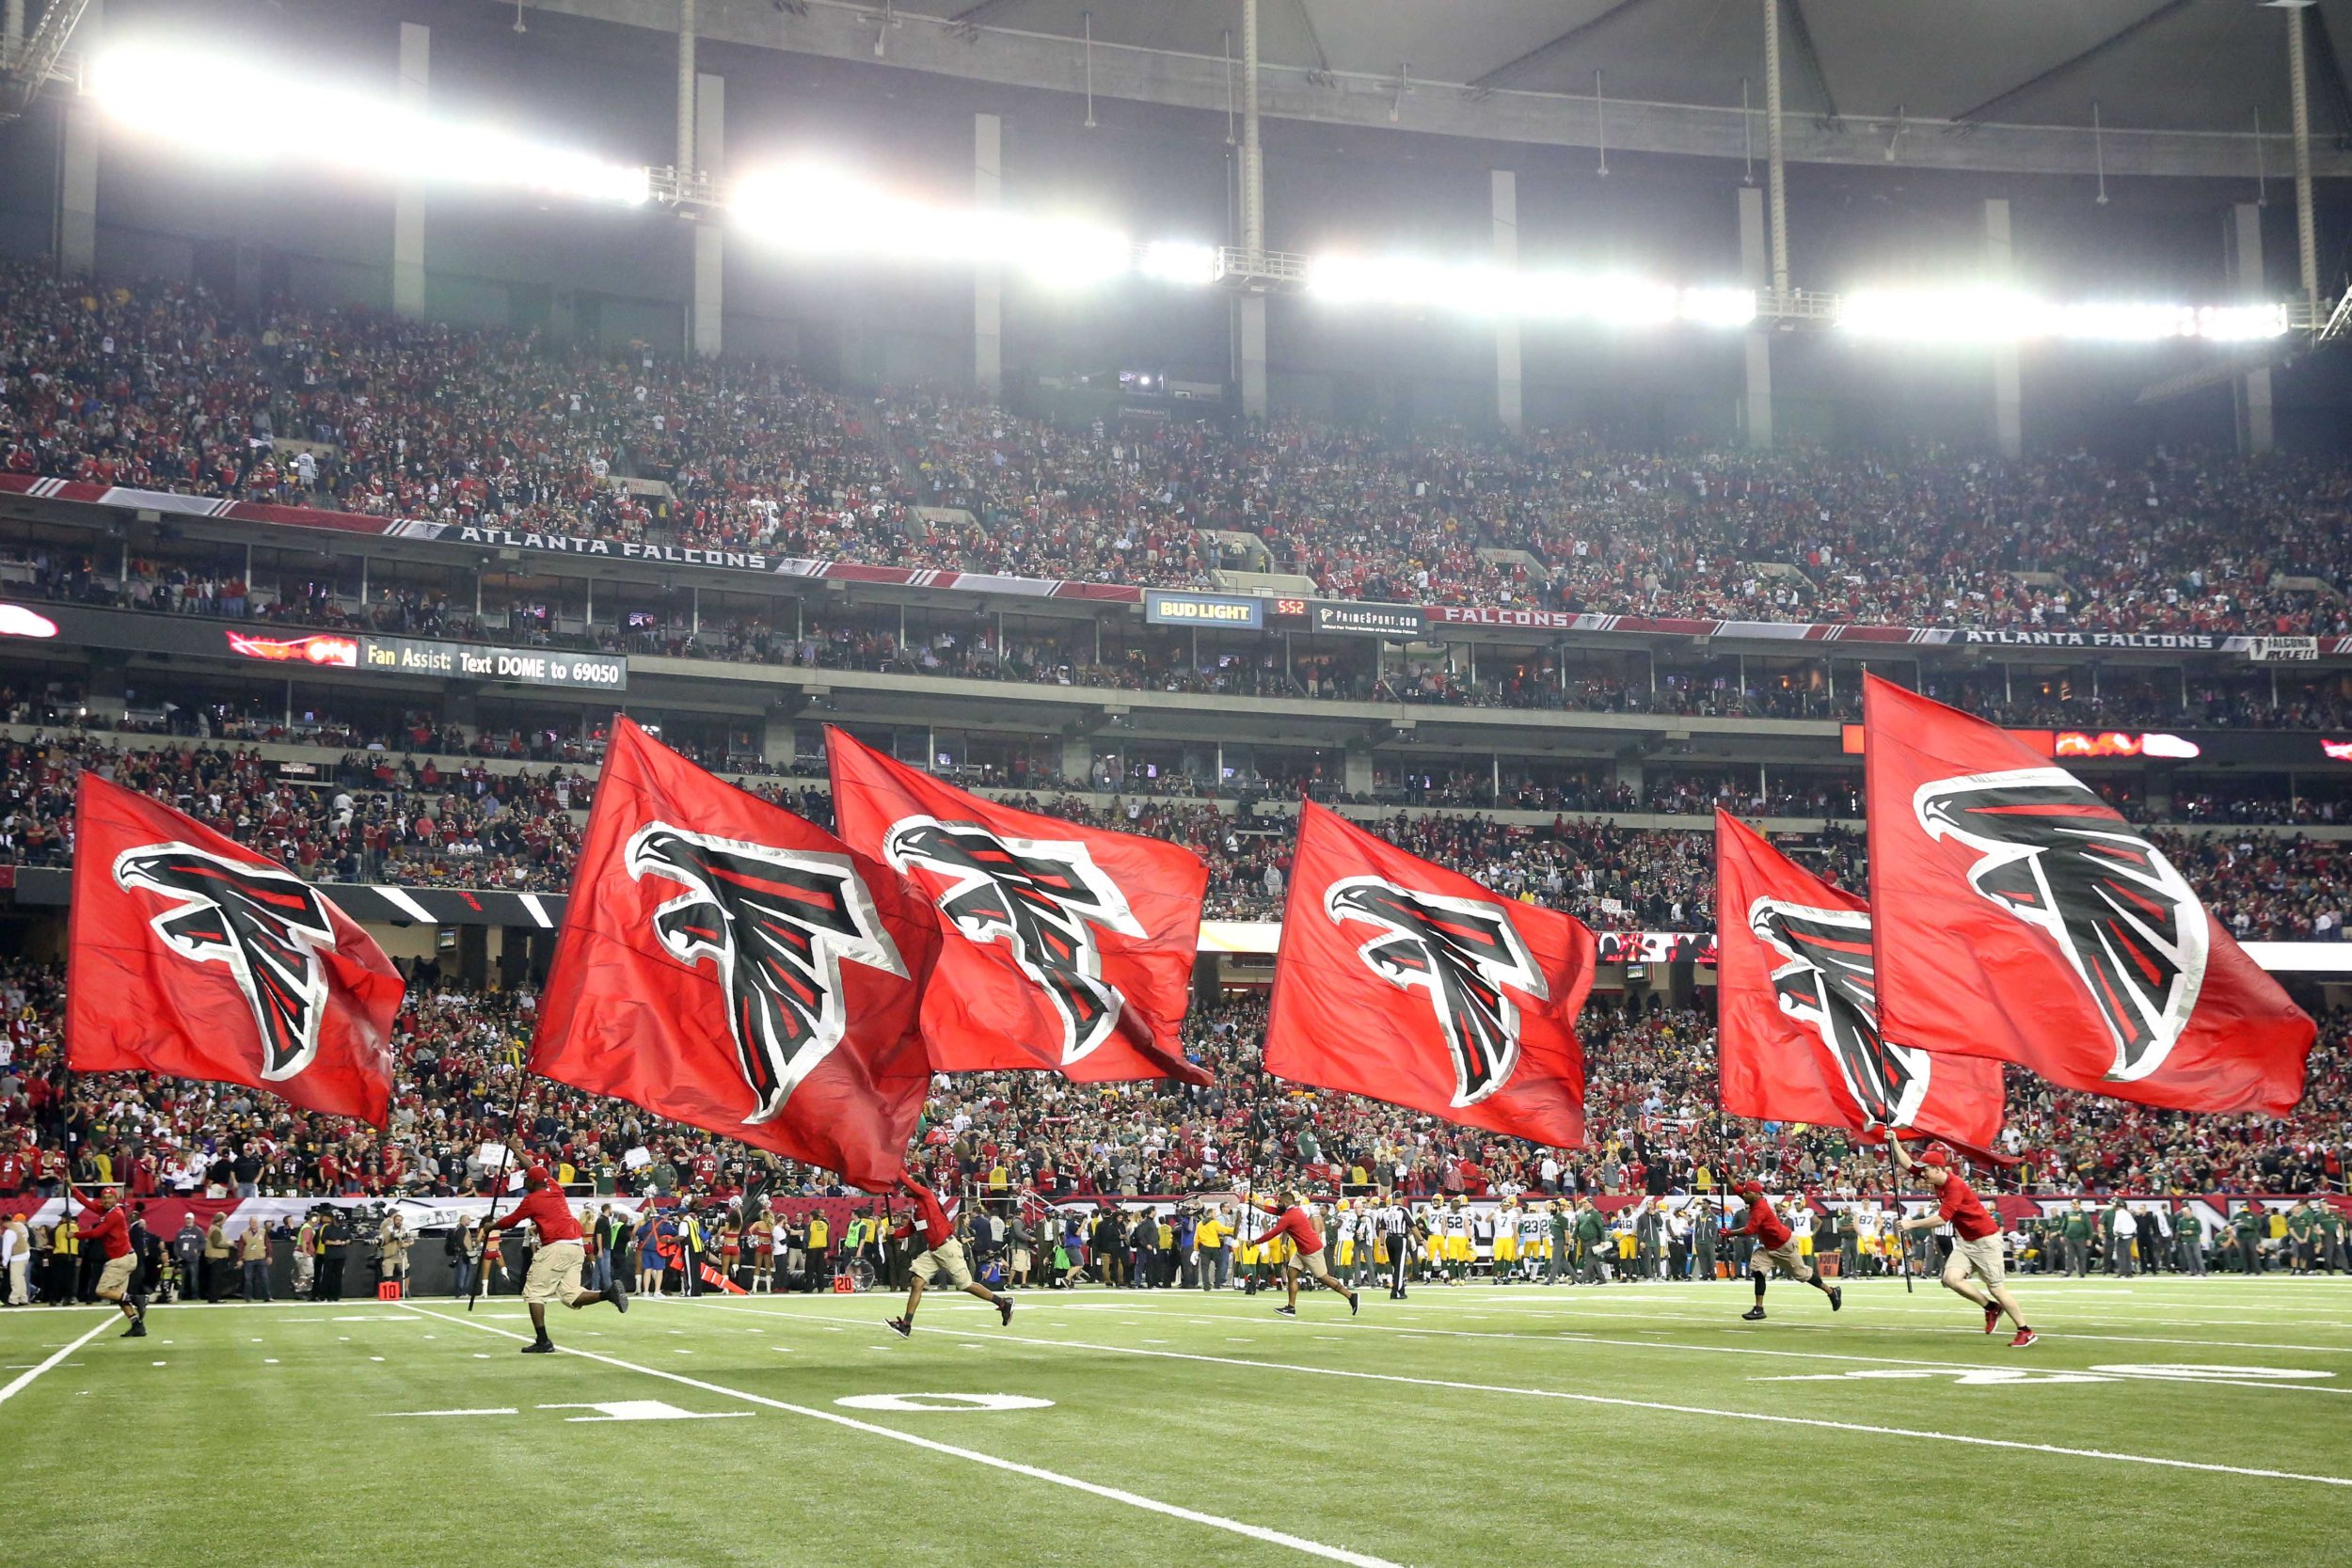 How Many Times Have The Atlanta Falcons Been To The Super Bowl? A